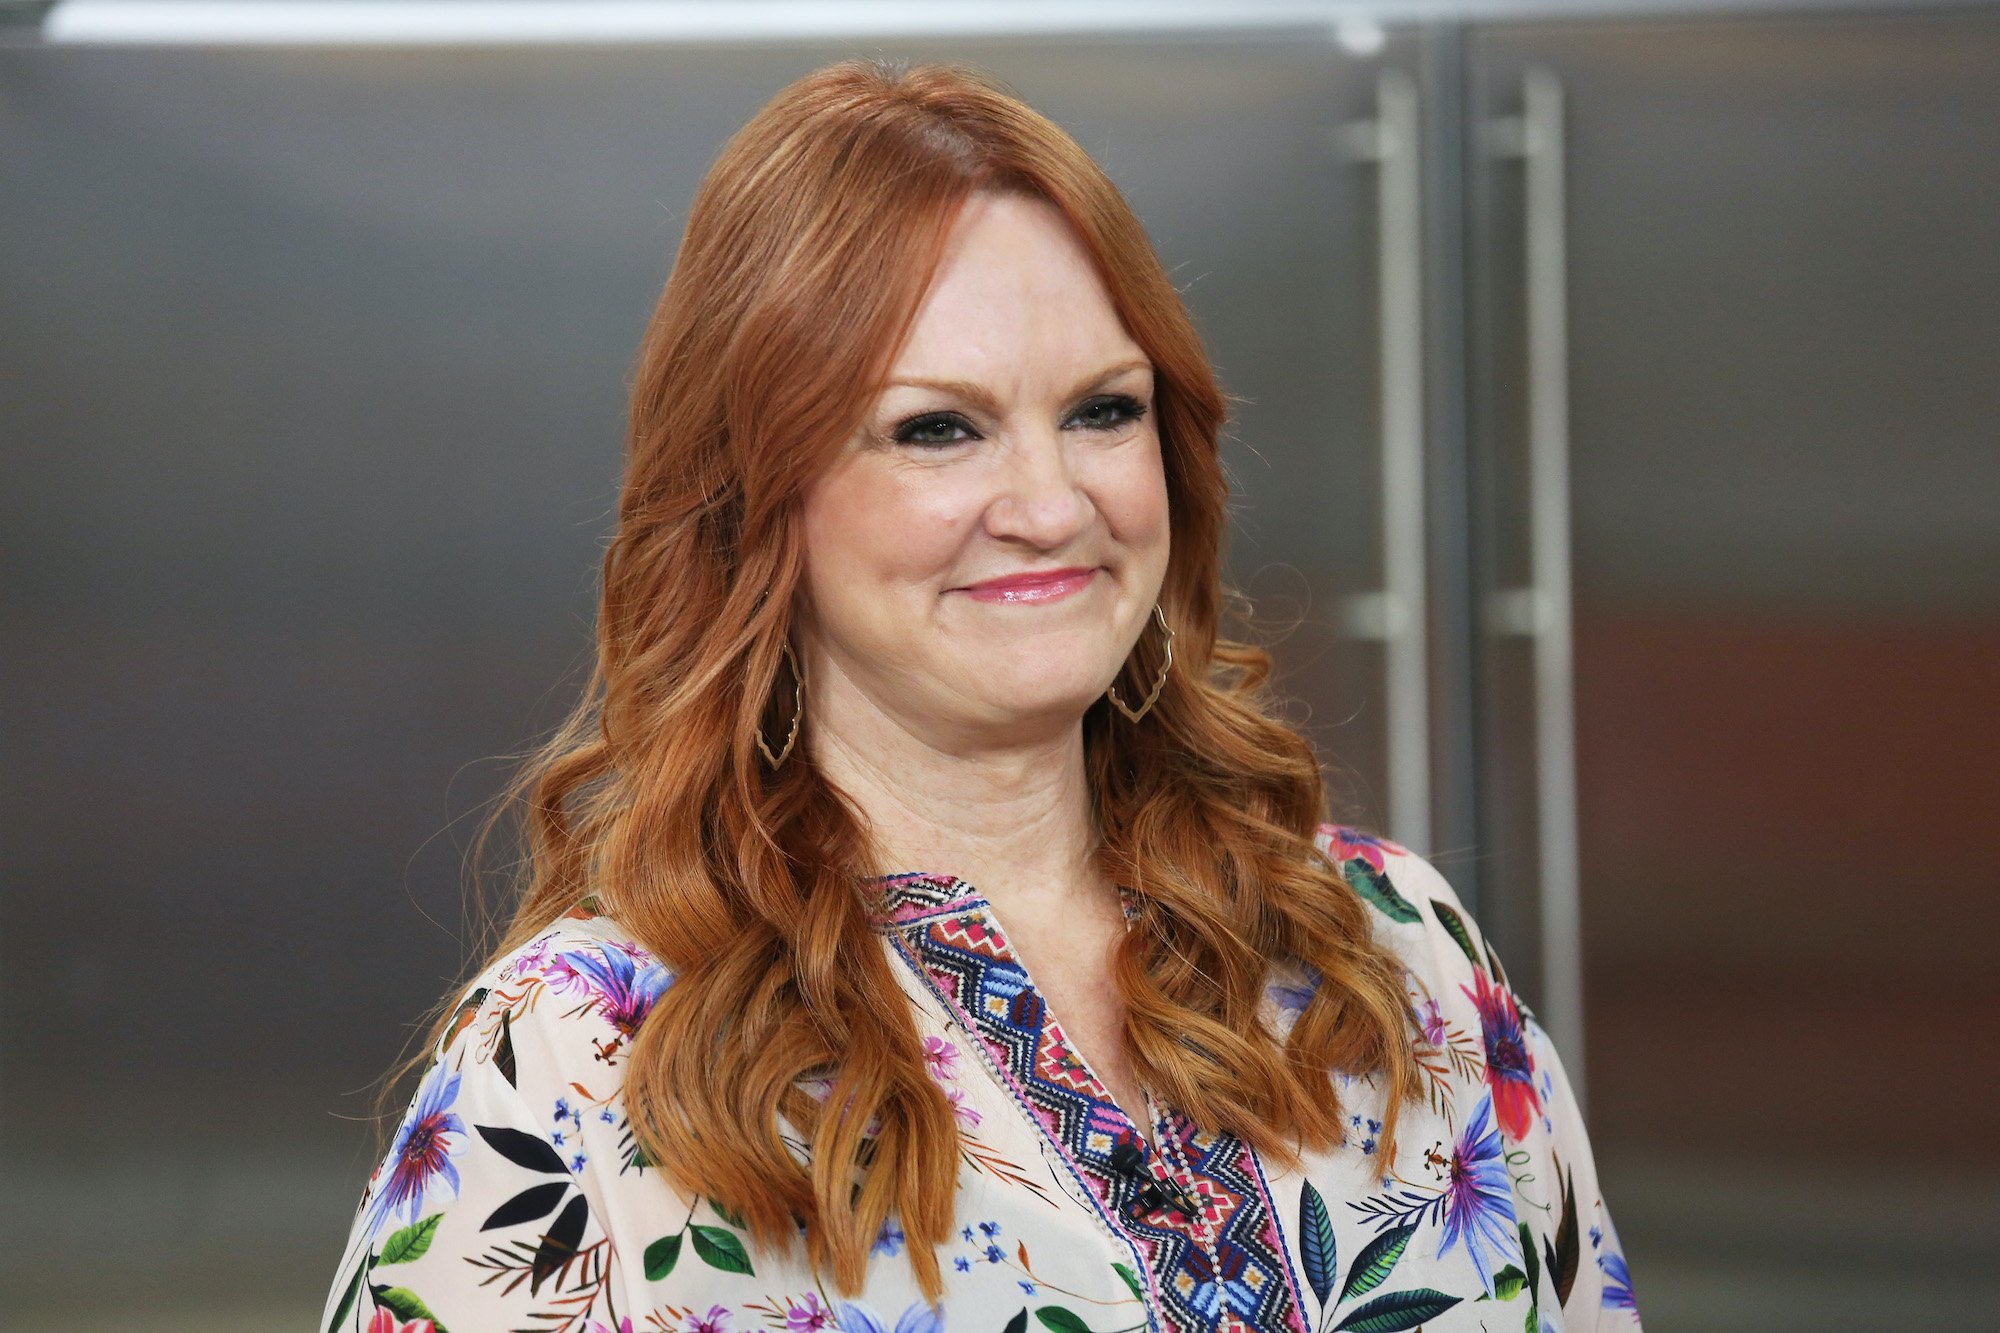 Ree Drummond star of 'The Pioneer Woman' on the set of 'Today' on October 22, 2019